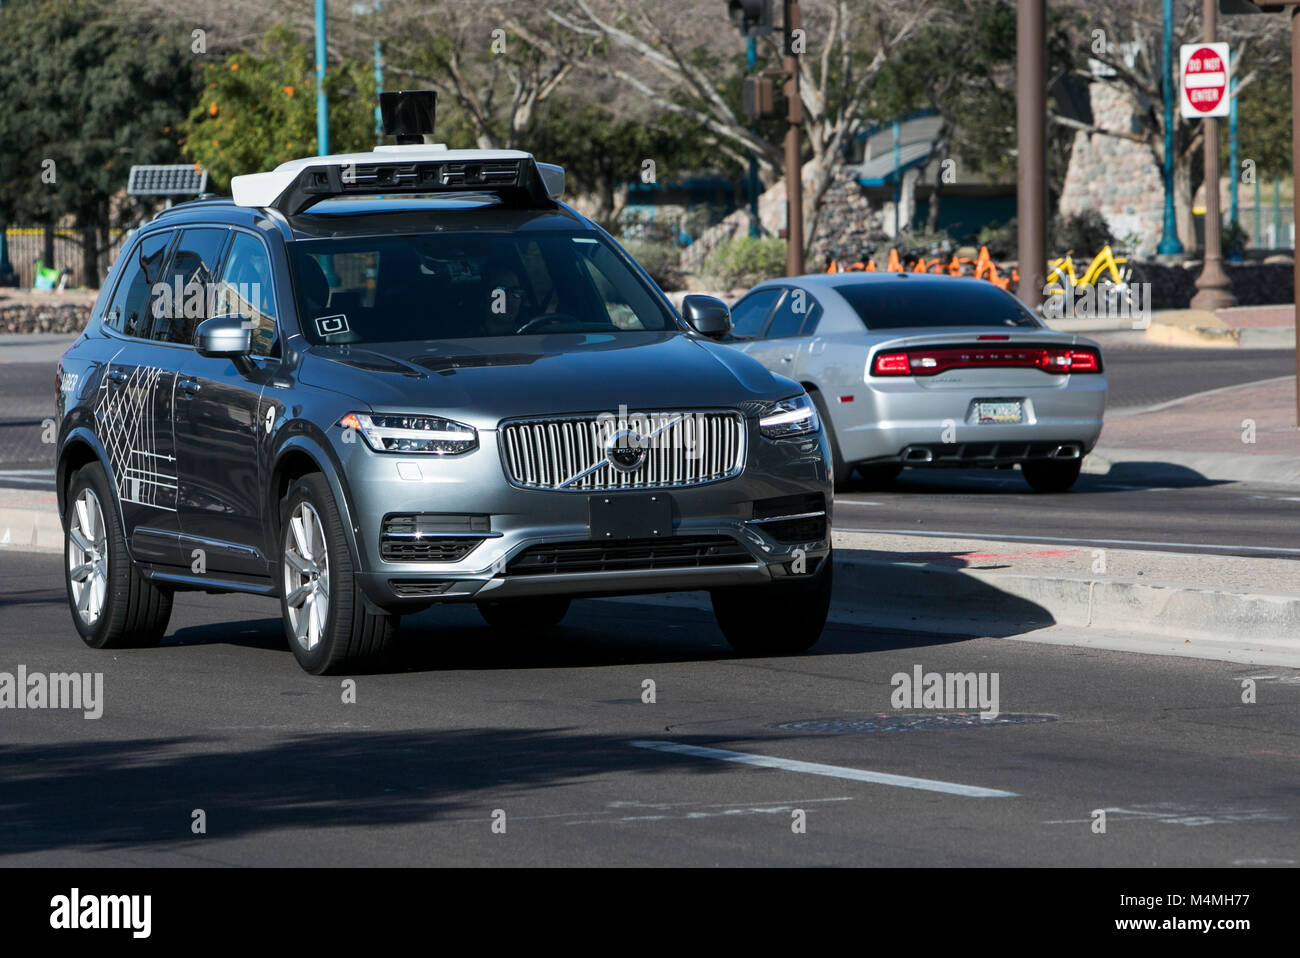 An Uber self-driving autonomous vehicle seen driving in Tempe, Arizona on February 3, 2018. Stock Photo